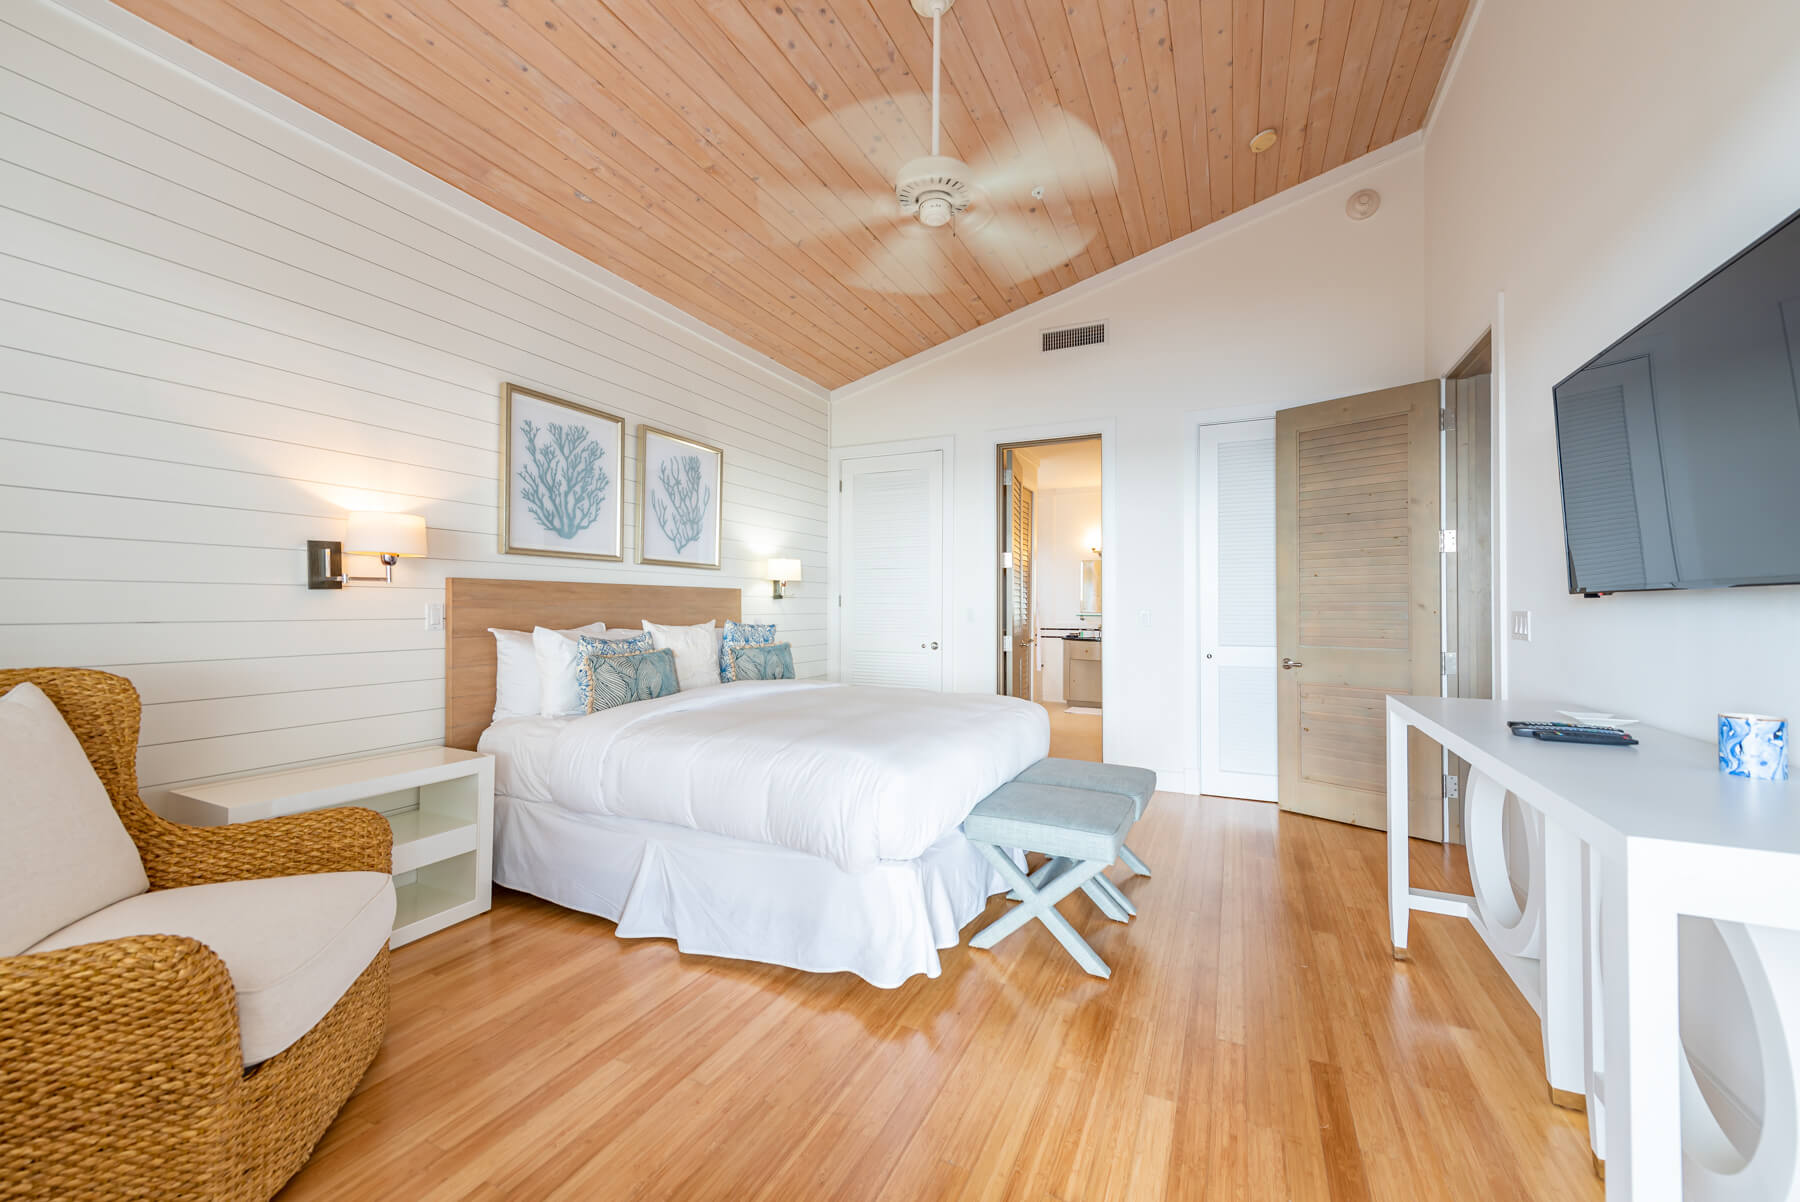 Beachfront villa bedroom at The Abaco Club, showcasing the dream of upscale coastal living in the Bahamas.